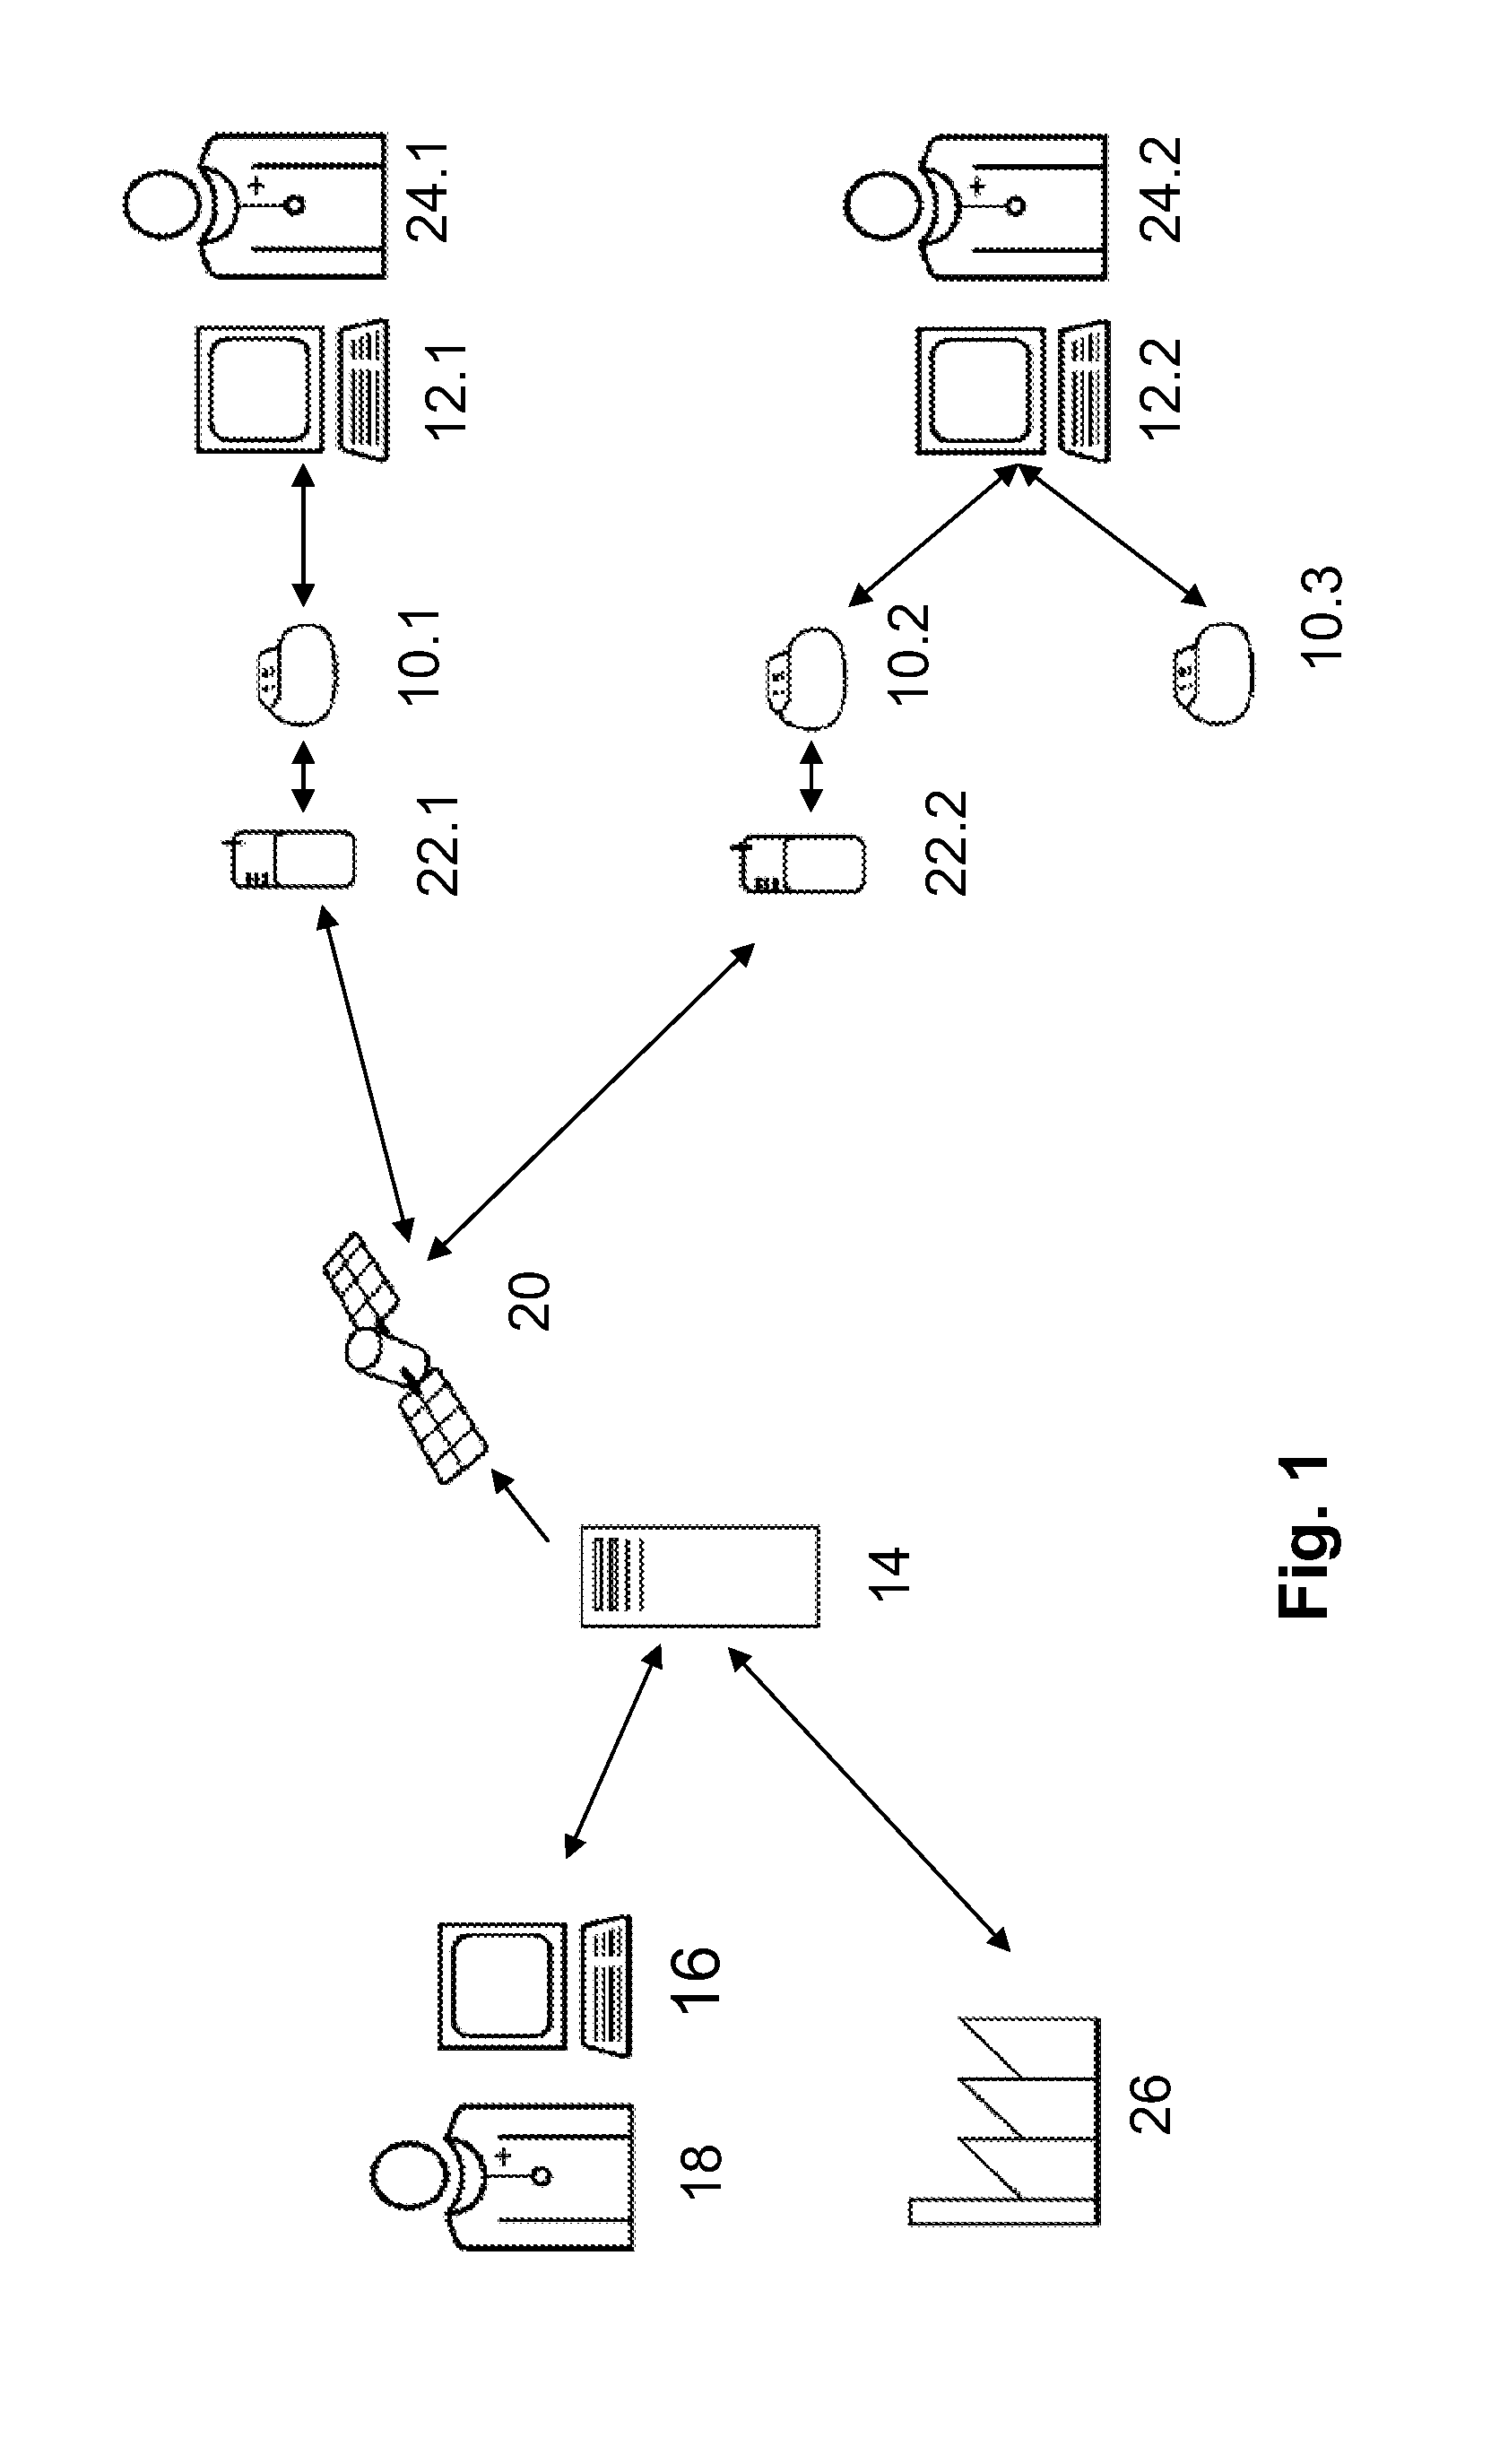 Medical implant having at least two data communication channels